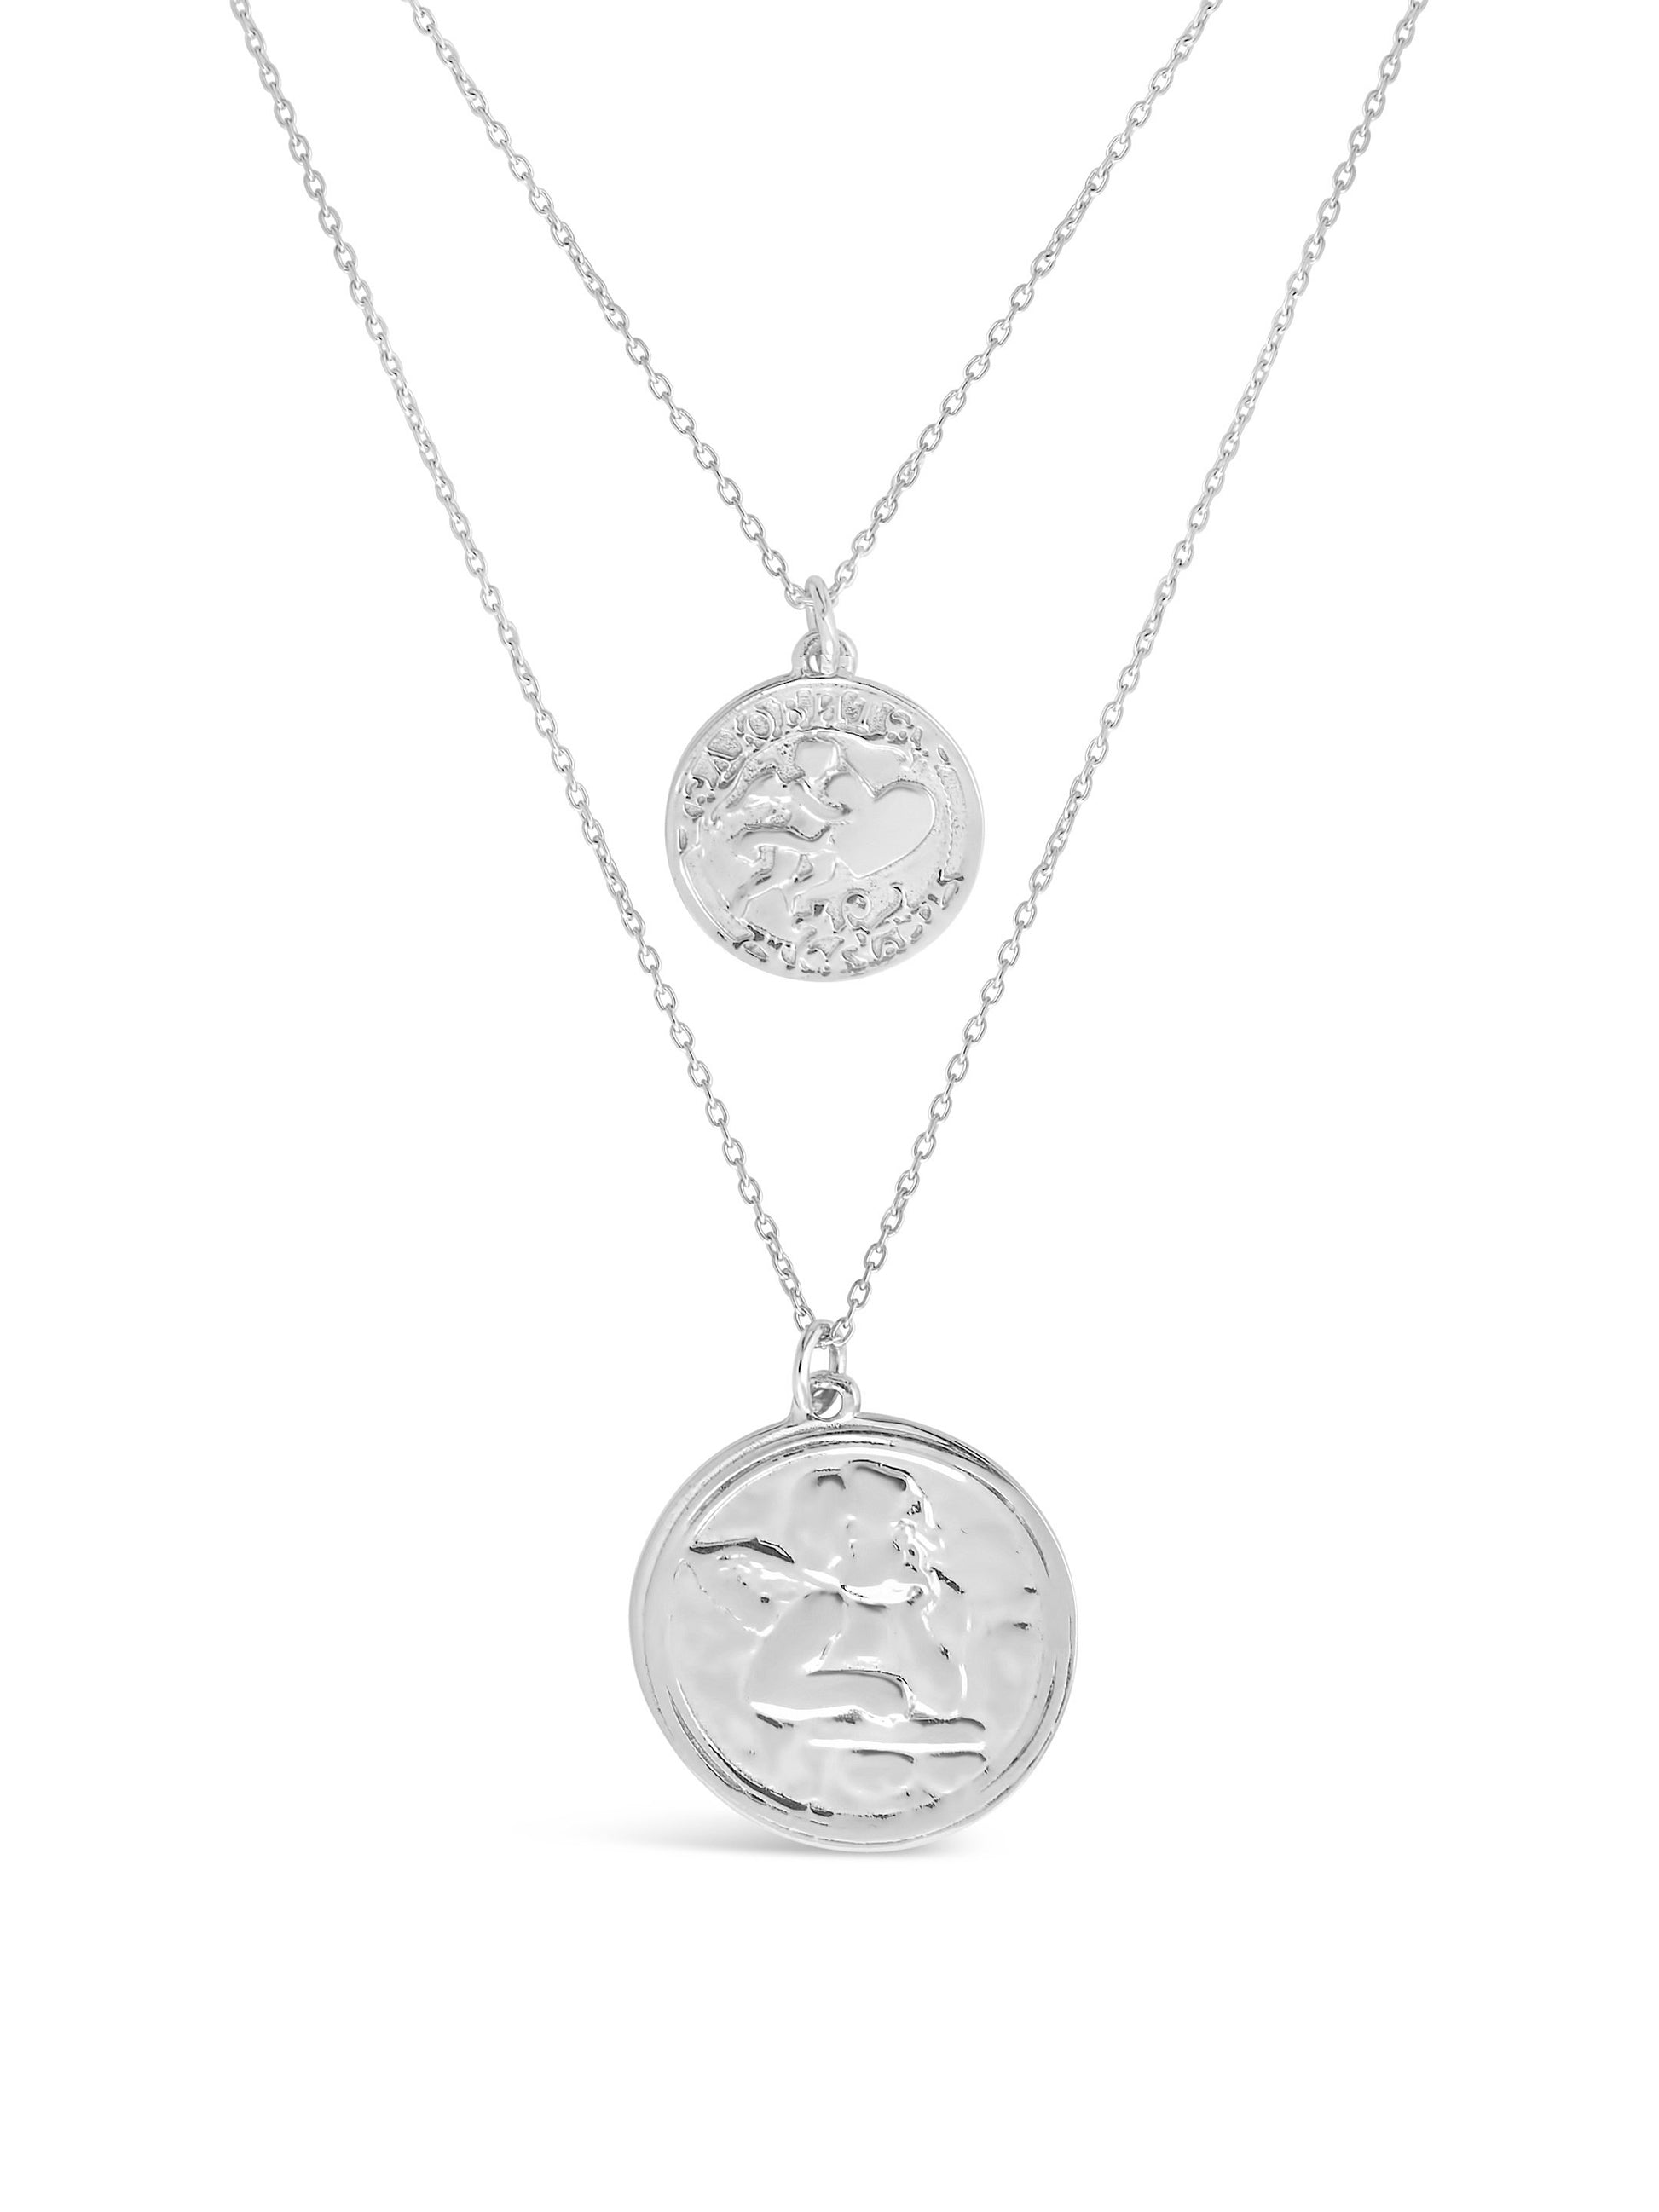 2 Layer Charm Necklace - Sterling Forever